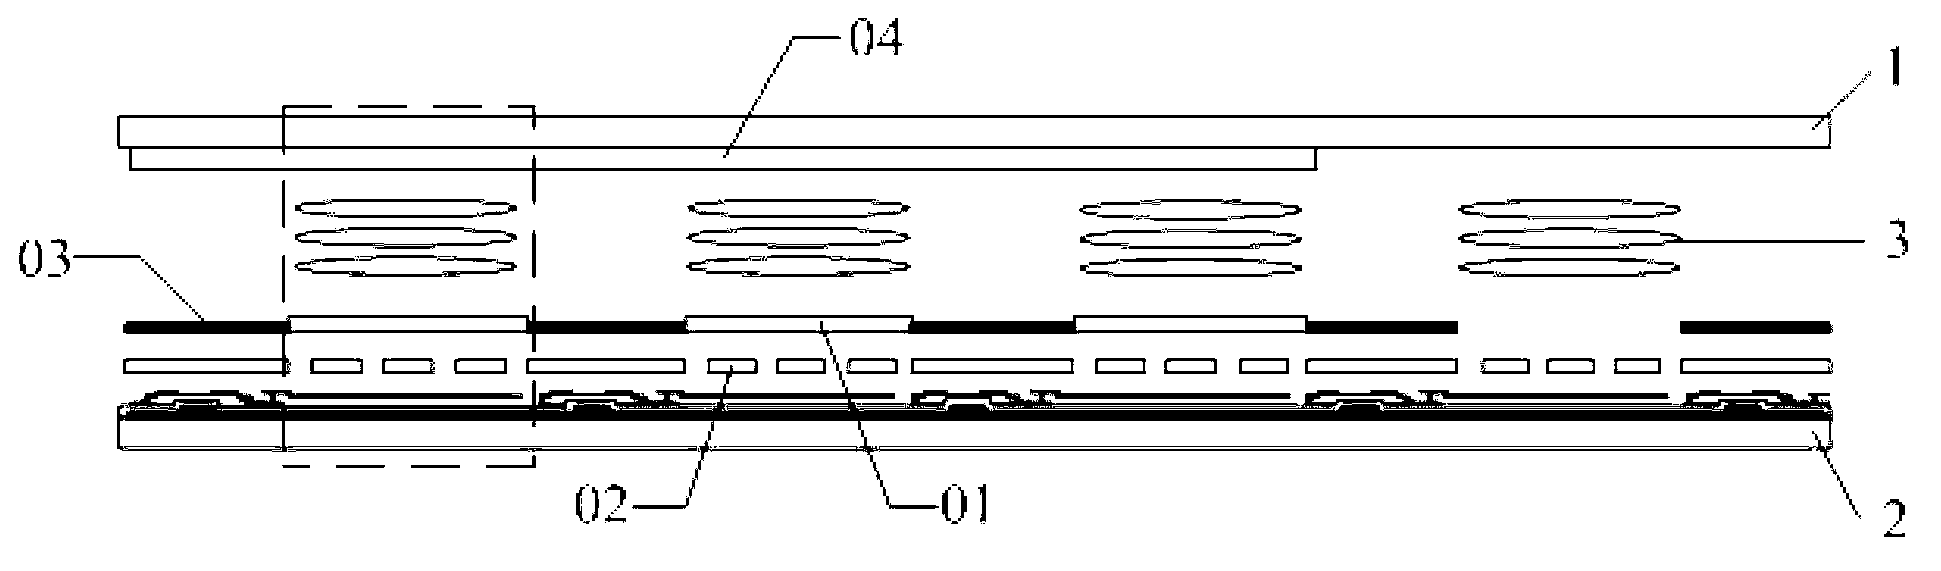 Liquid crystal display screen, display device and quantum dot layer graphical method